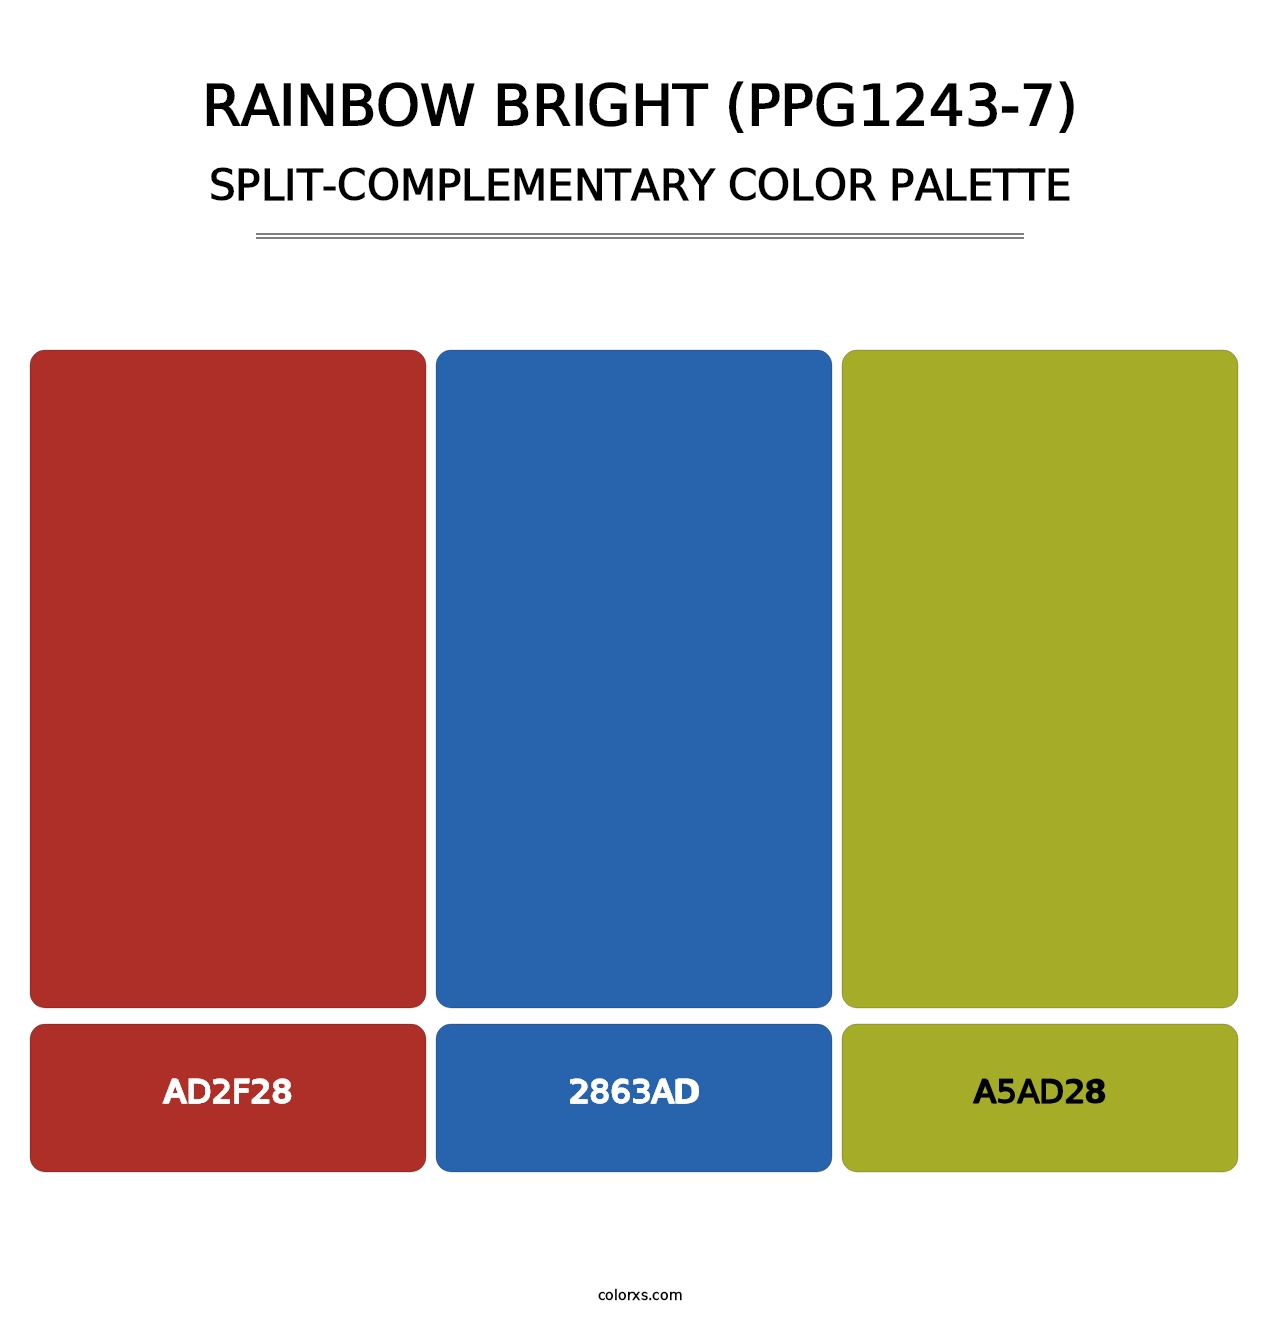 Rainbow Bright (PPG1243-7) - Split-Complementary Color Palette